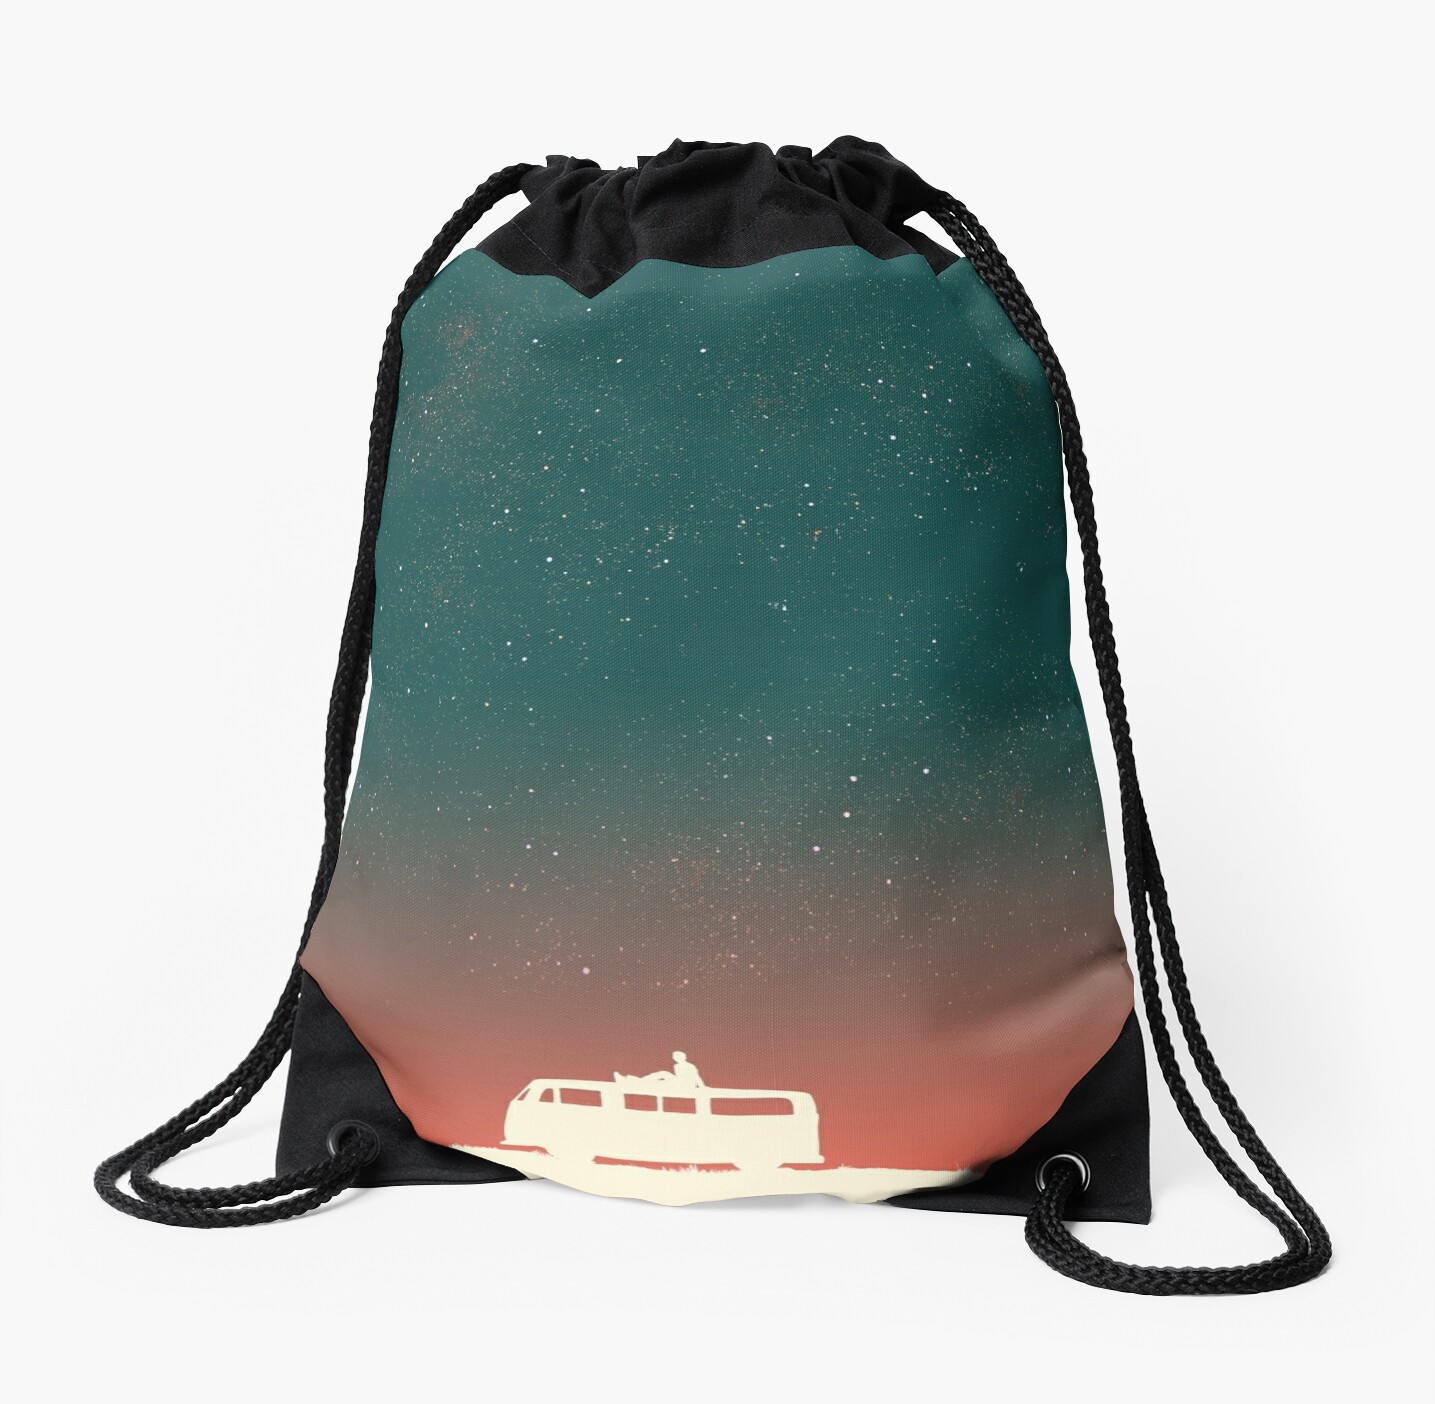 15 Perfect Drawstring Bags for 5 Different Uses » Redbubble Blog